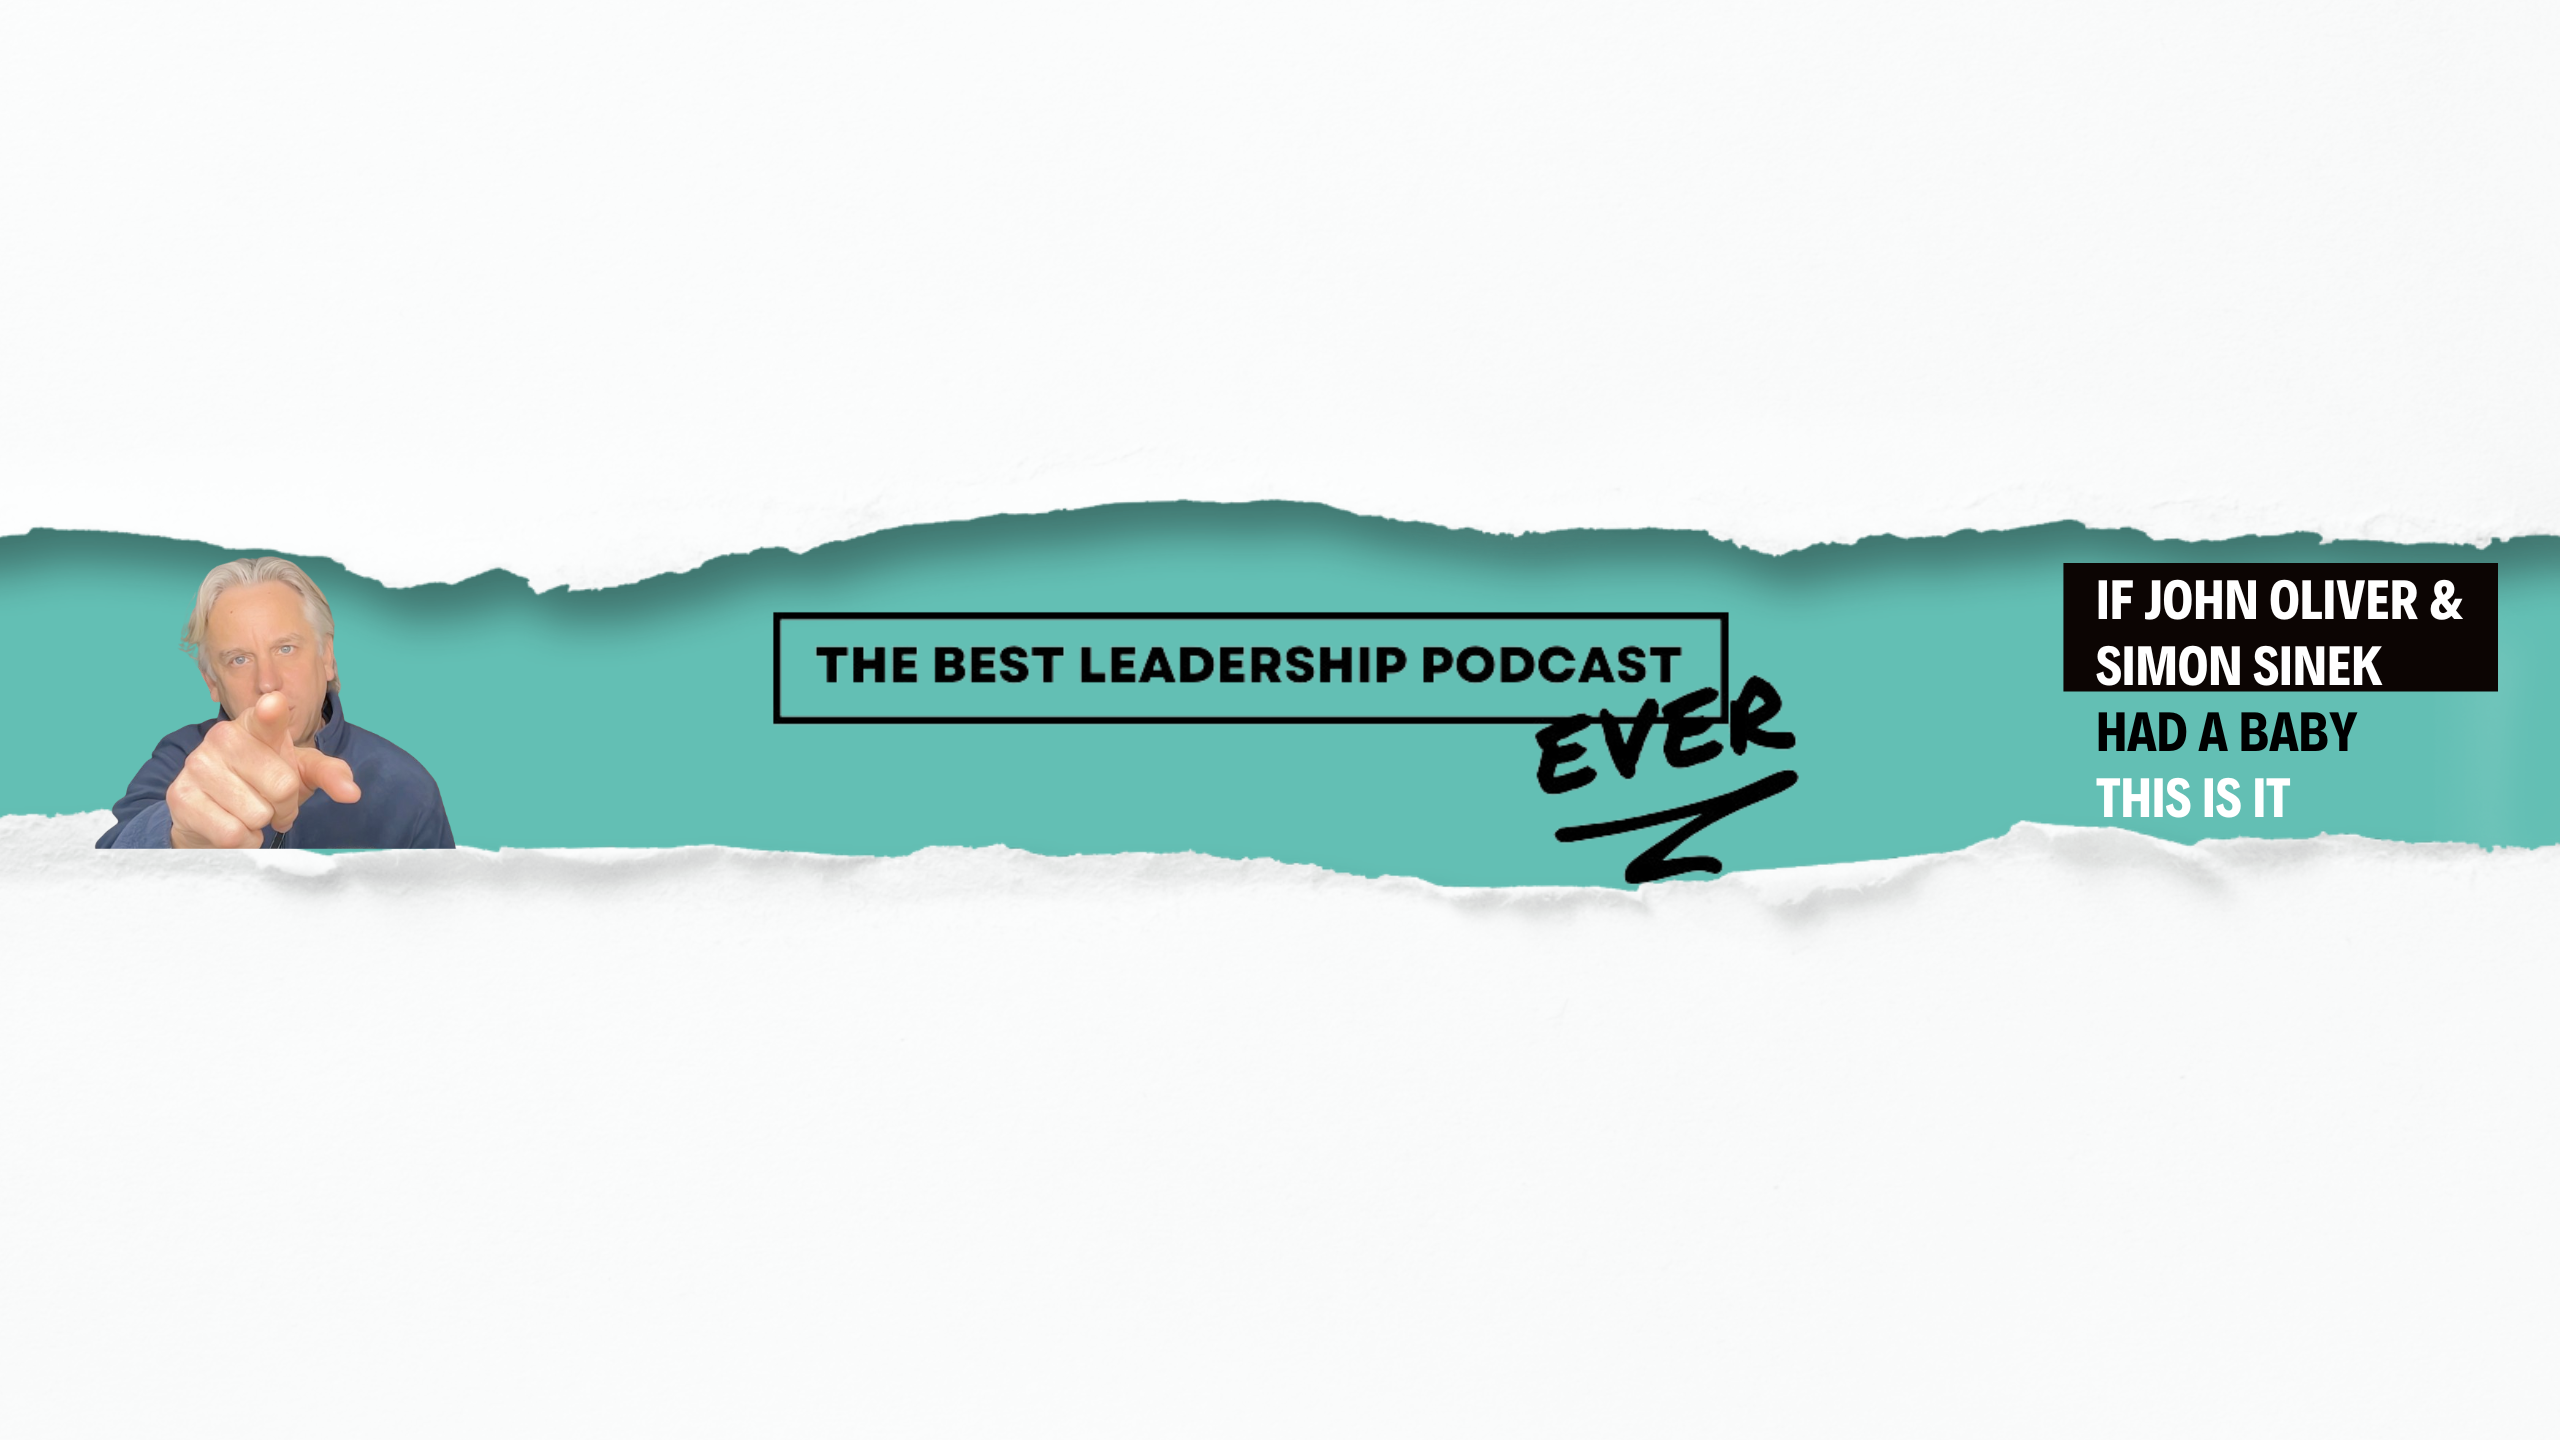 The best leadership podcast ever - Jeff Matlow